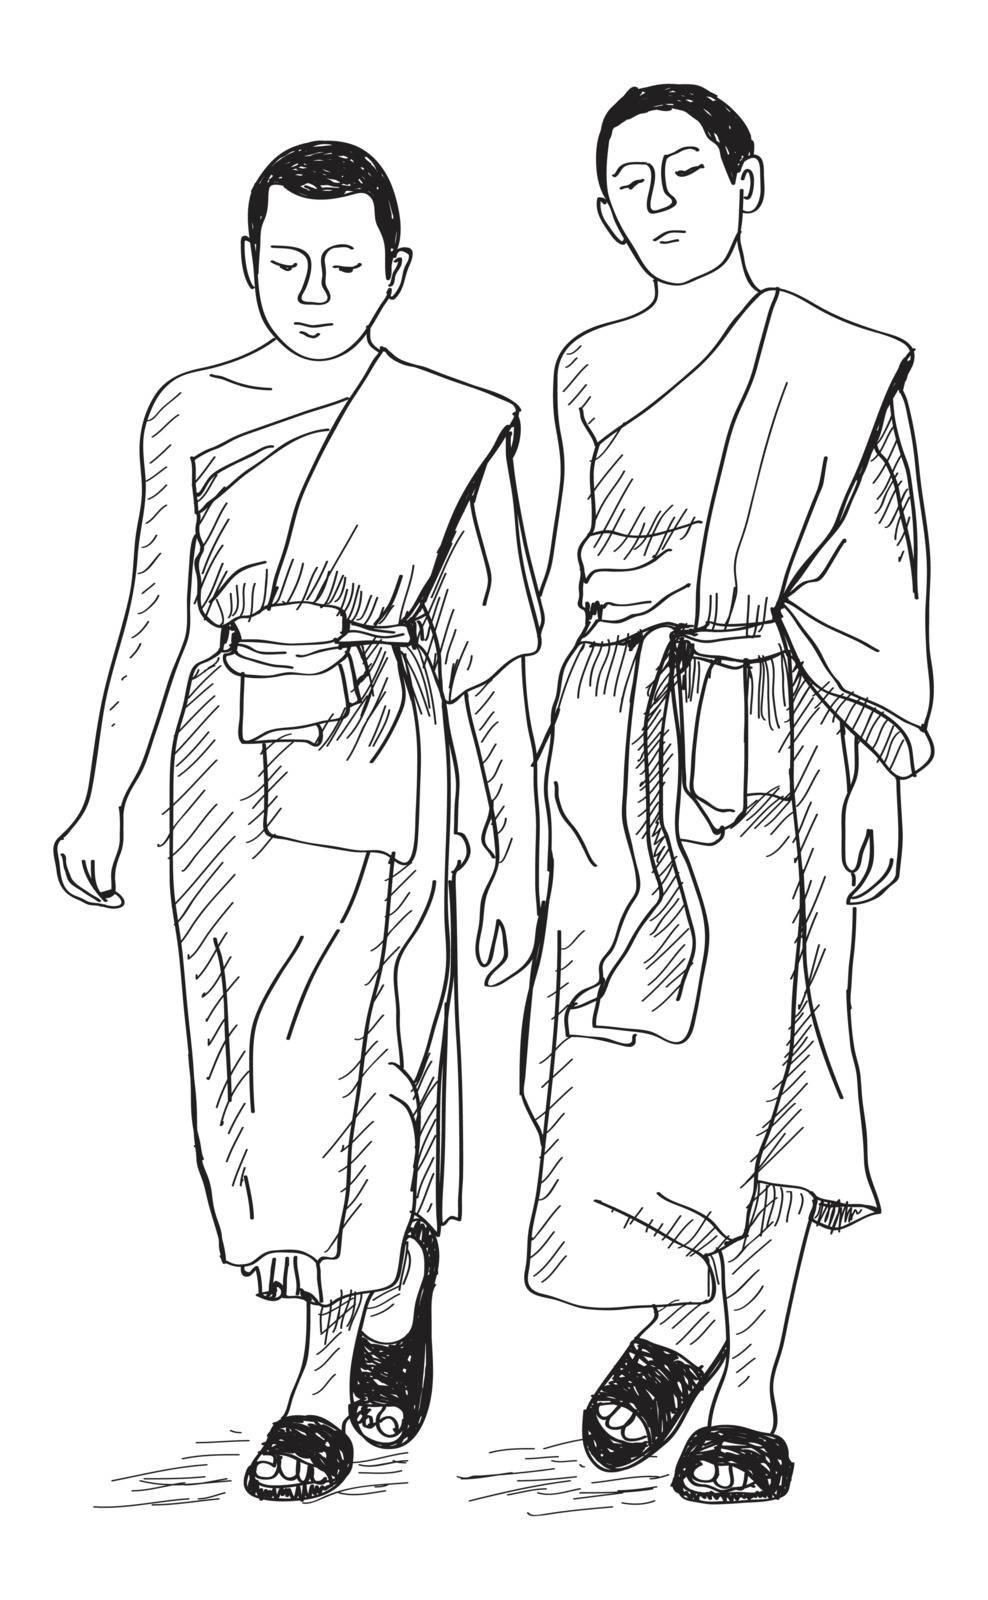 sketch of young buddhist monks walking on street in Thai, Chiangmai, free hand draw illustration vector